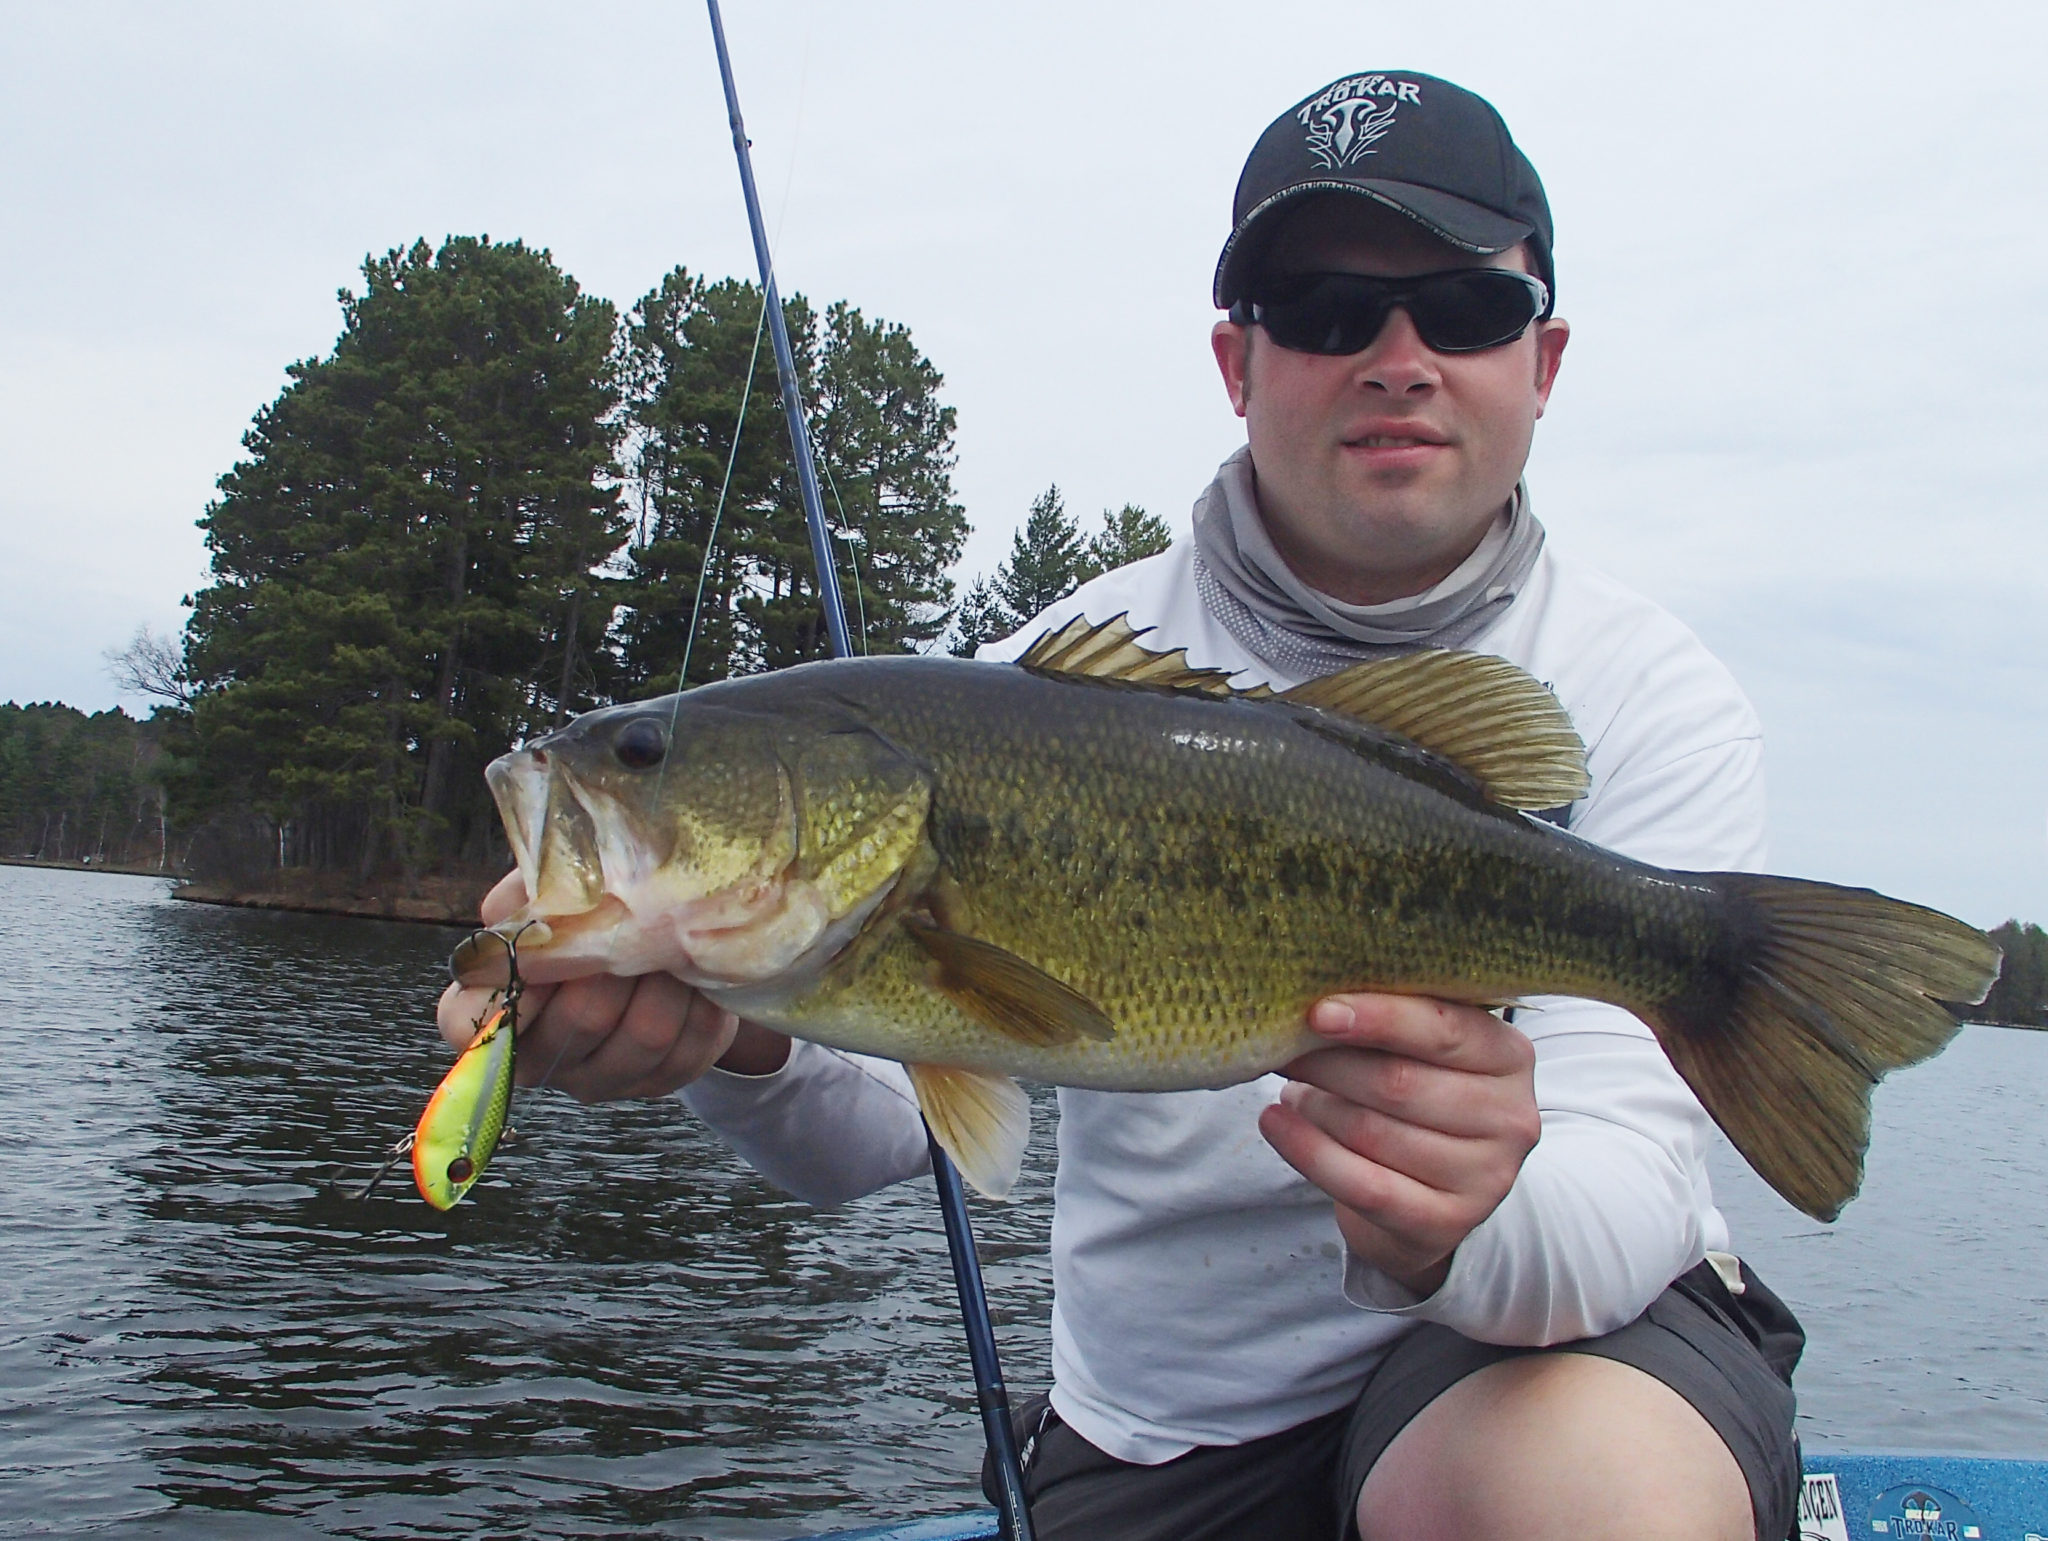 20 tips on how to become a better bass angler